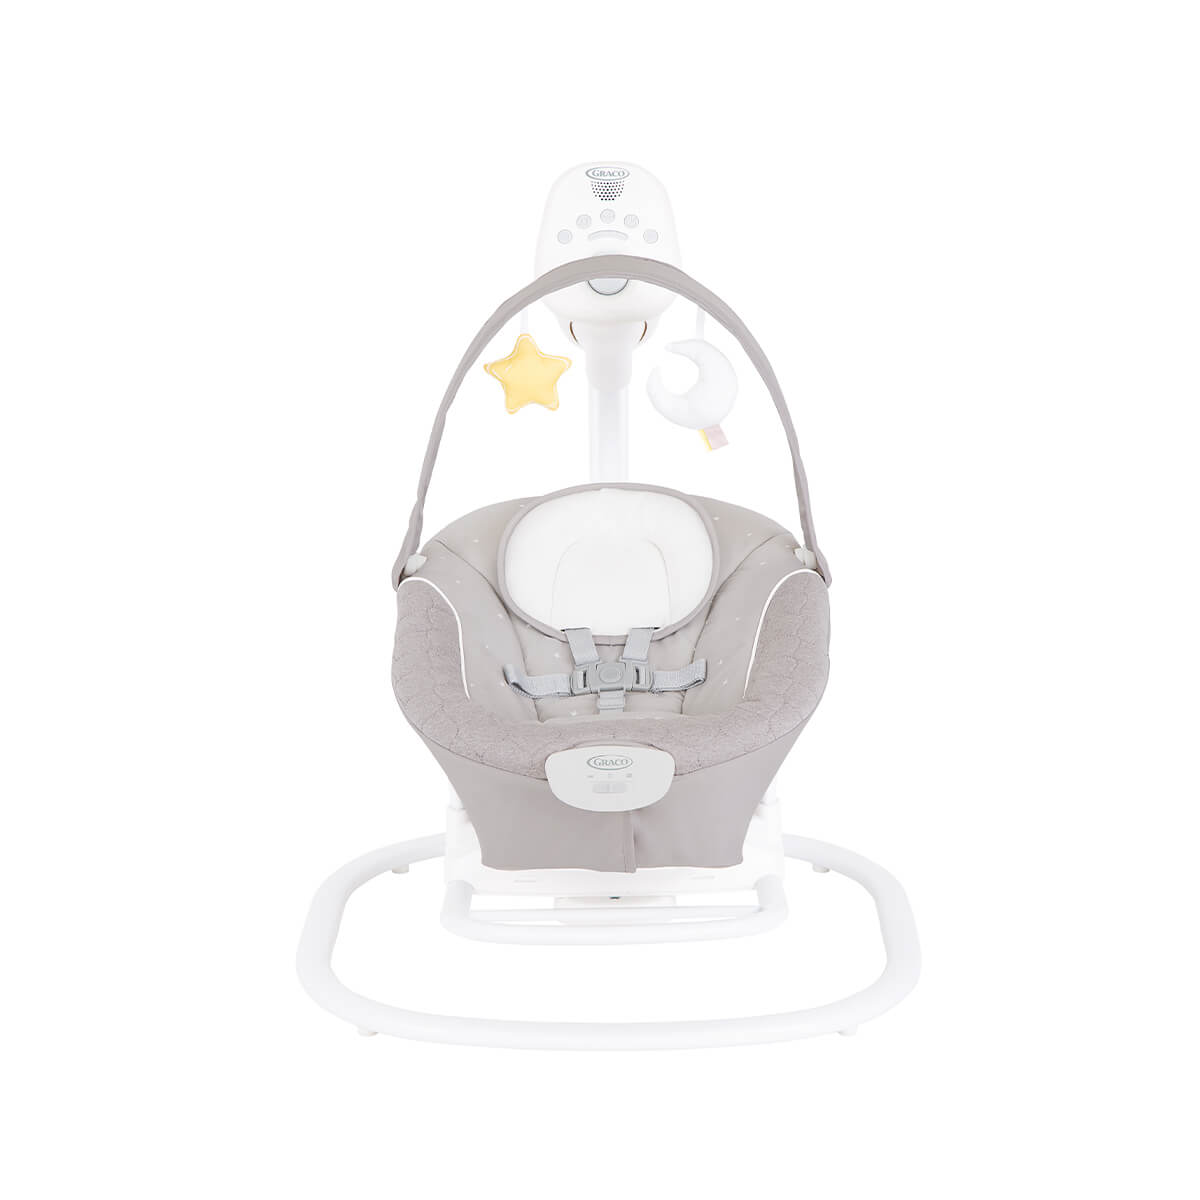 Graco SoftSway silent 2-in-1 smart swing, front angle on white background.